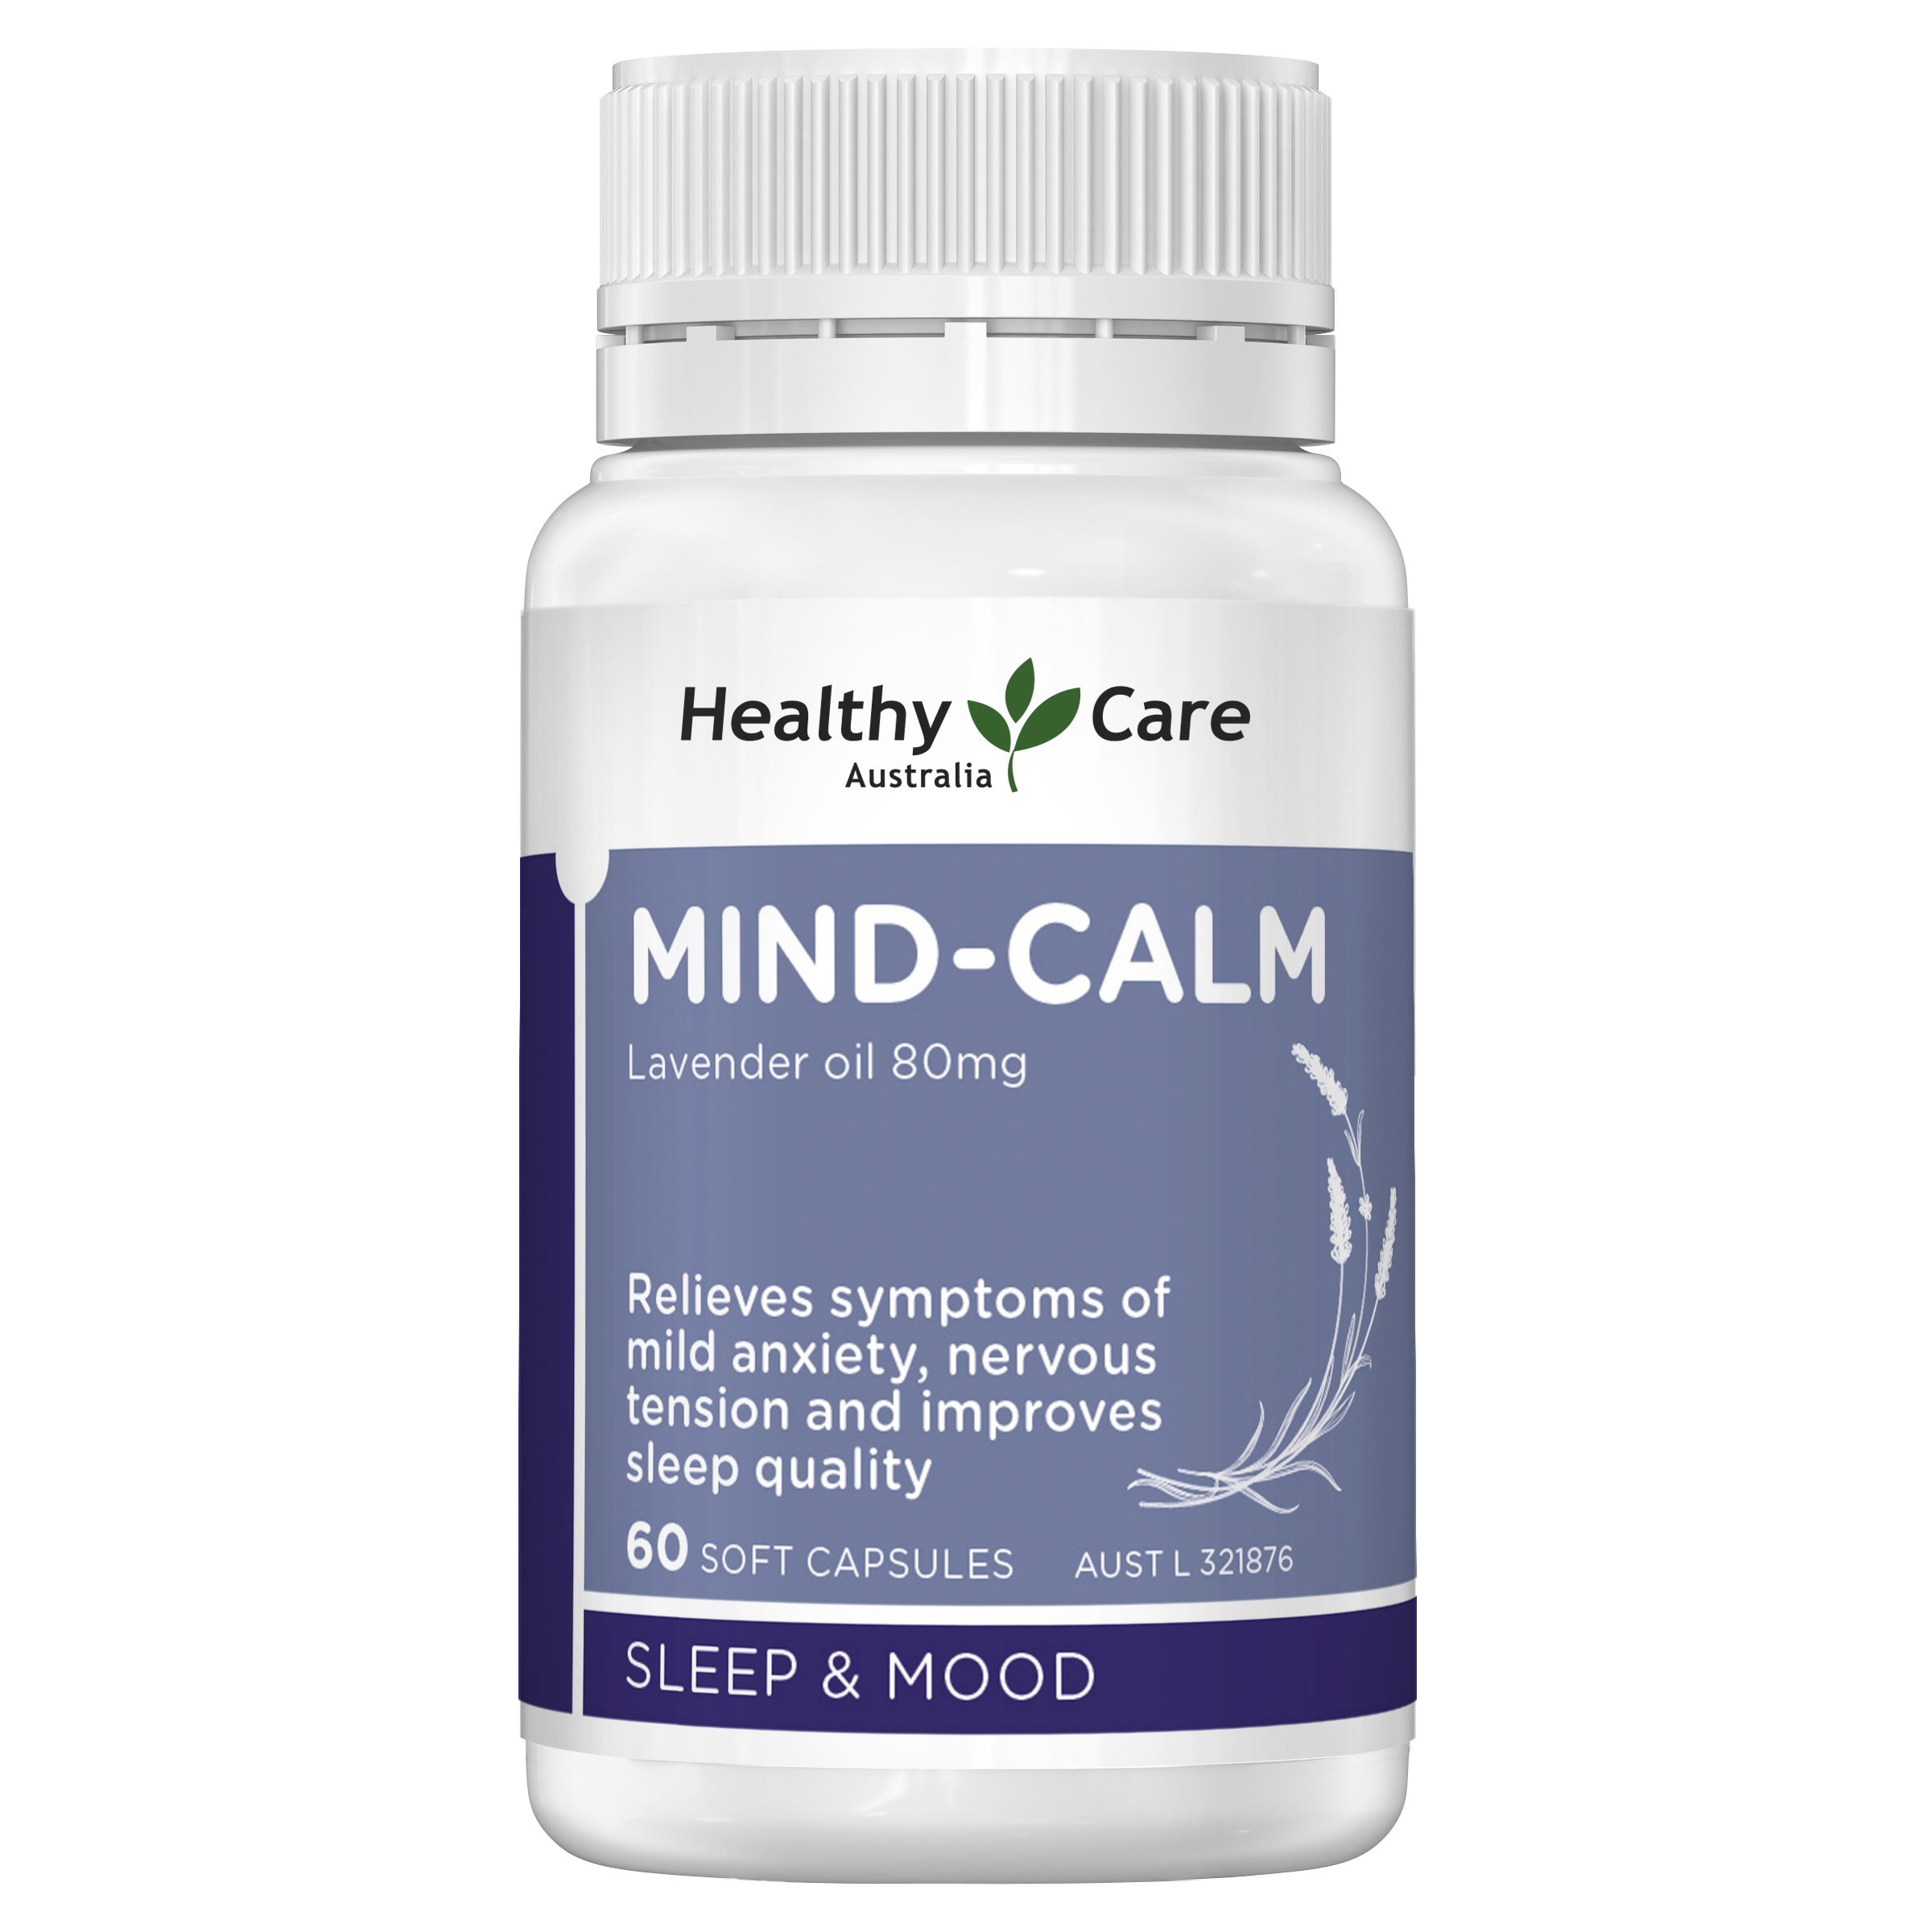 Healthy Care Mind-Calm - 60 Capsules